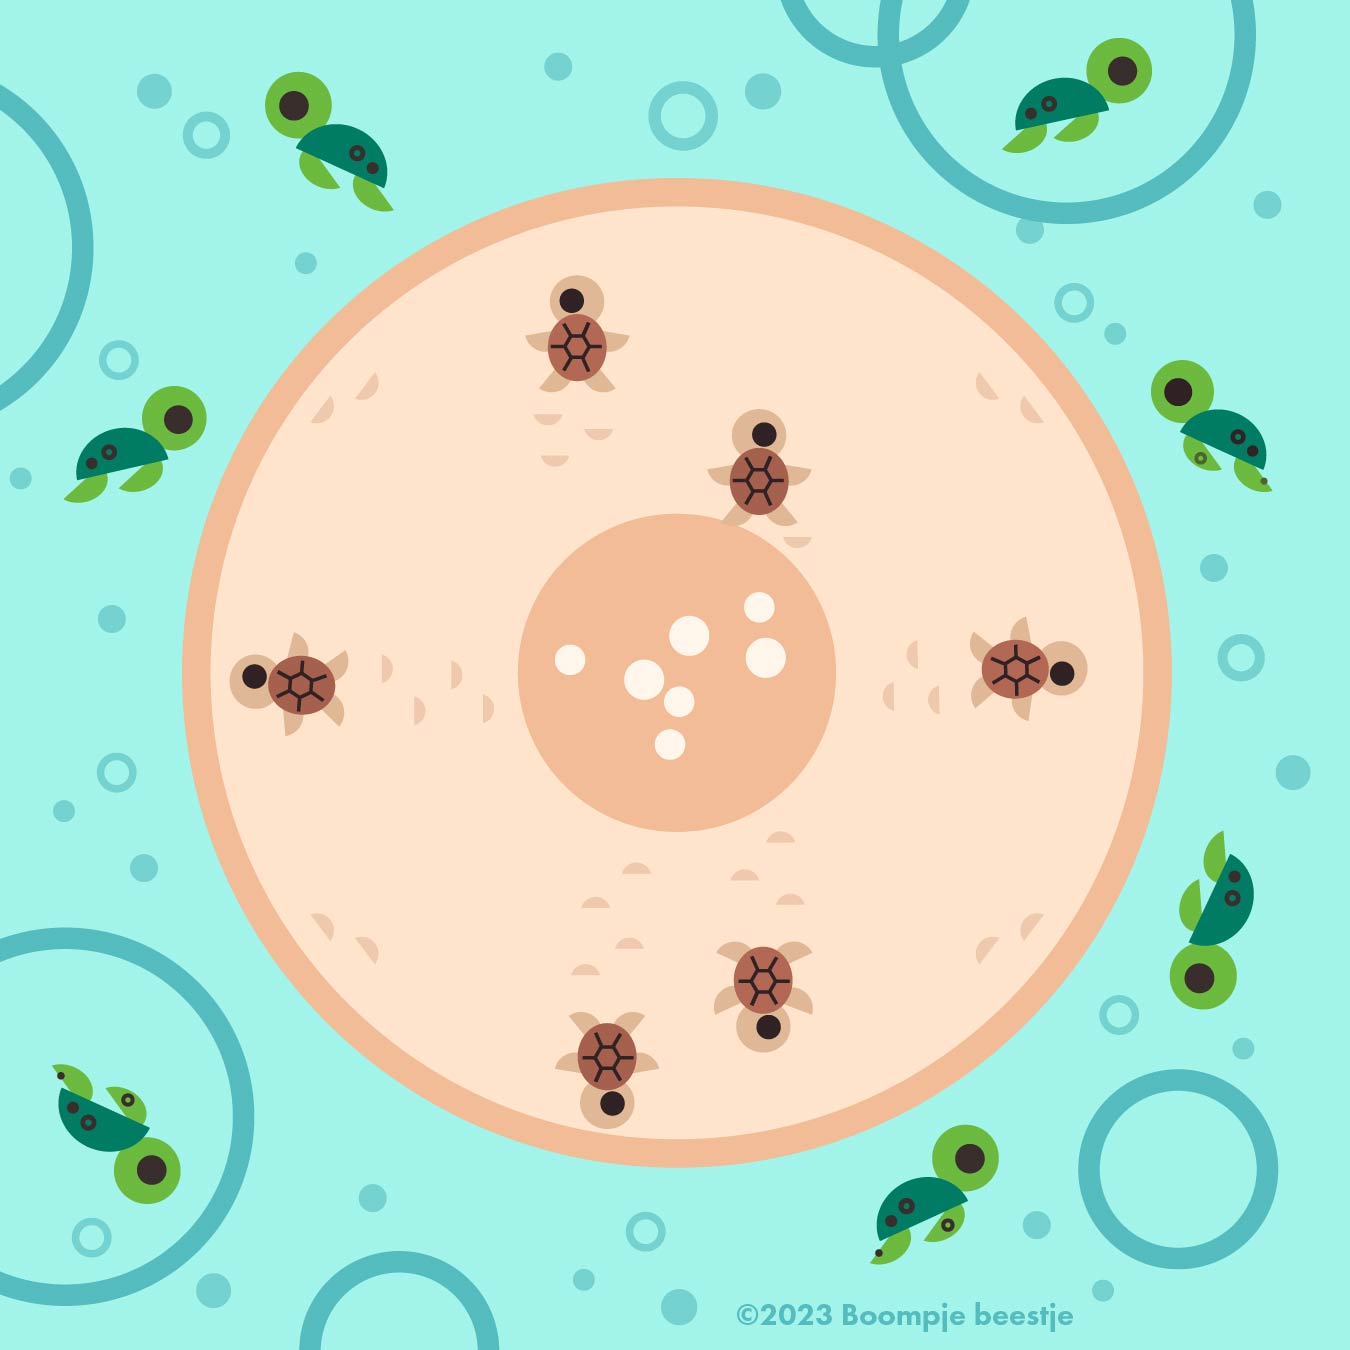 An illustration of small blue-green sea turtles swimming in water surrounded by bubbles and an circle island in the middle with more small brown beige sea turtles and eggs.